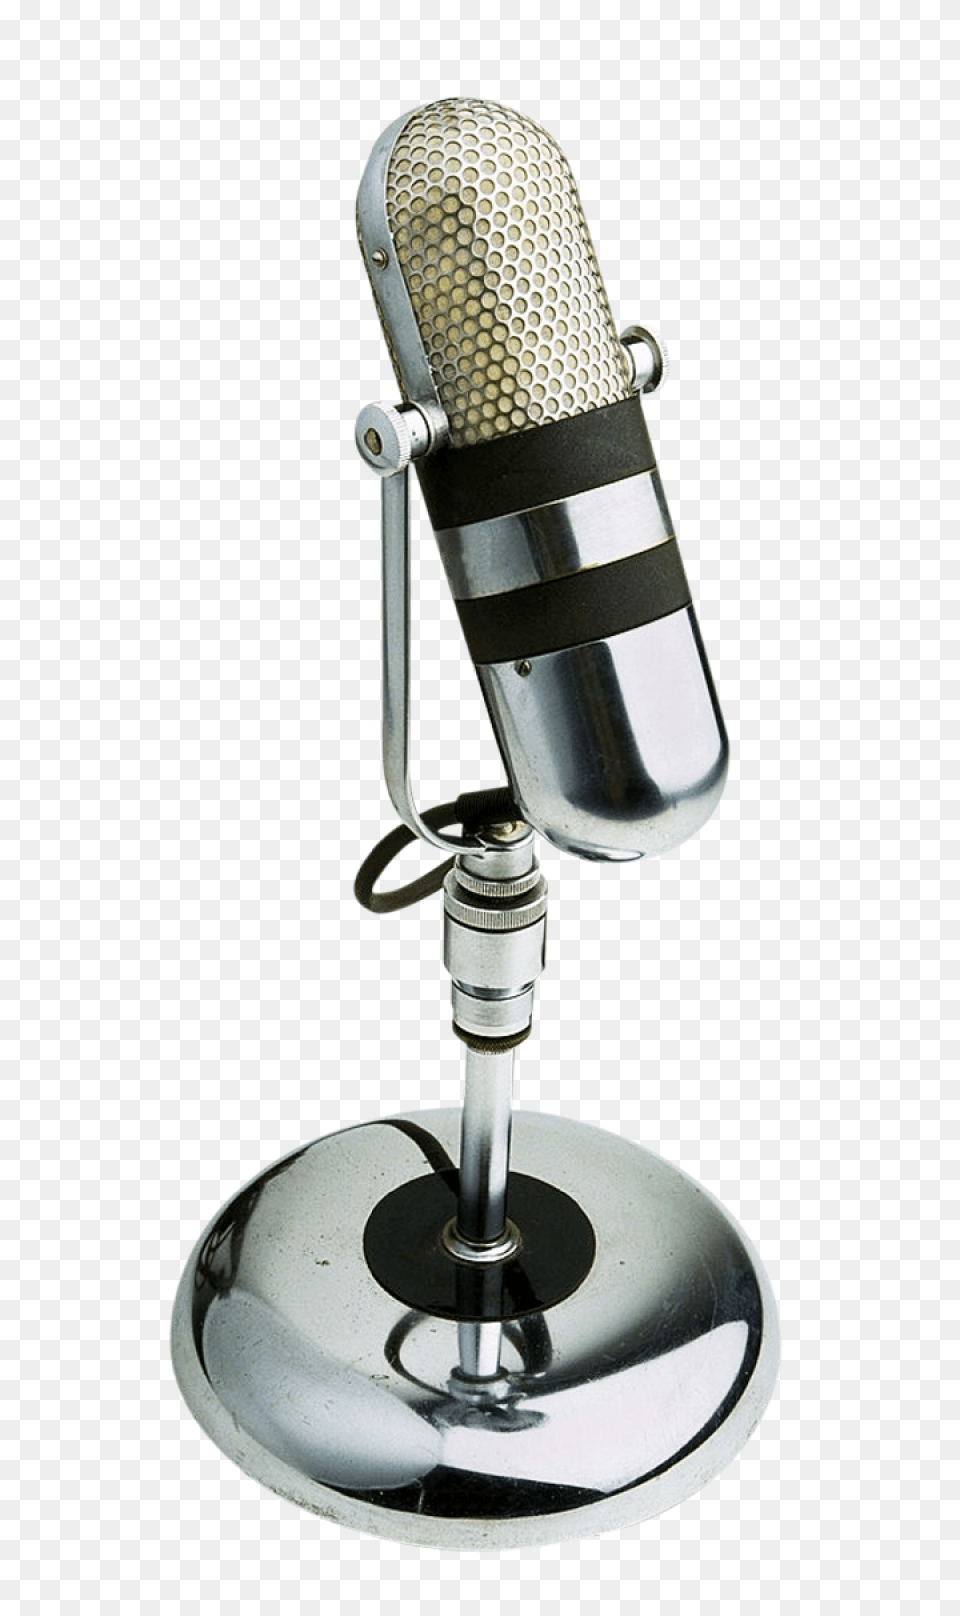 Download Mic Image For Microphone, Electrical Device, Smoke Pipe Free Transparent Png